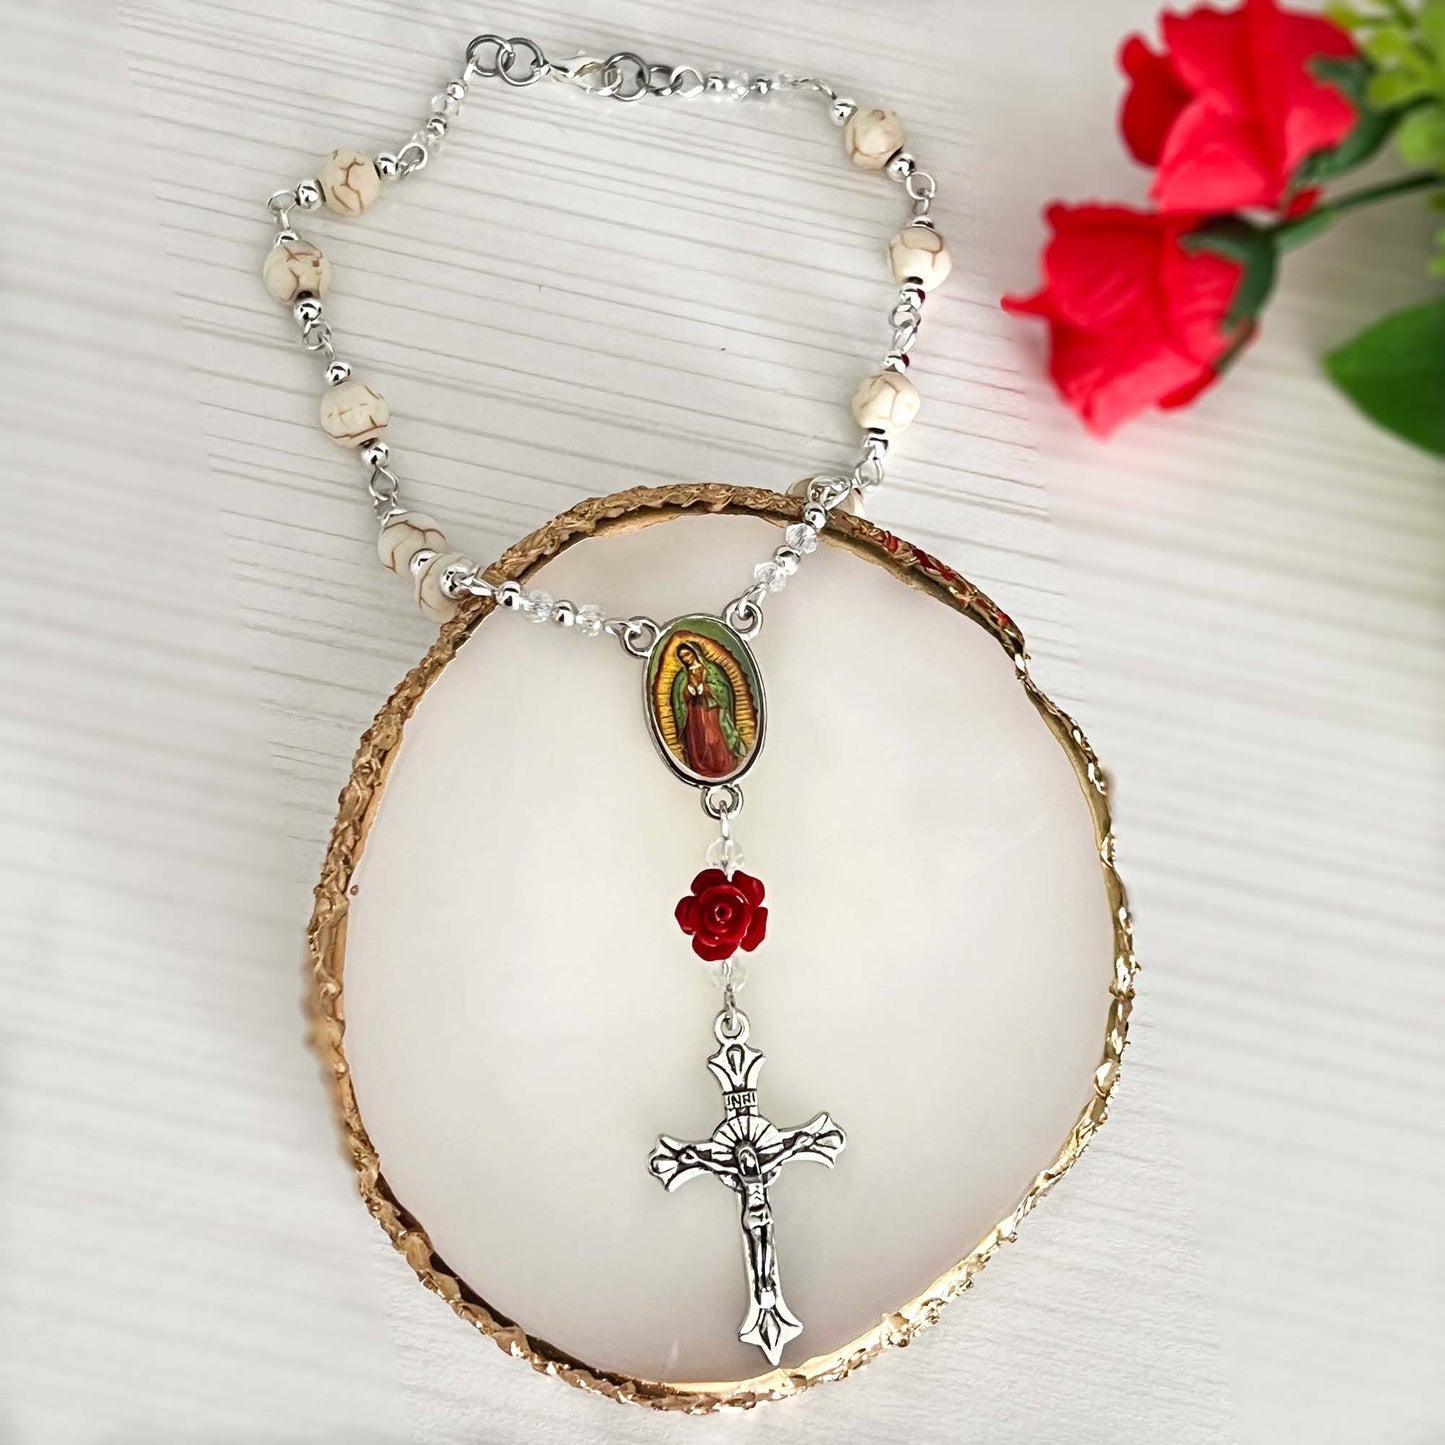 Our Lady of Guadalupe Car Rear View Mirror Charm